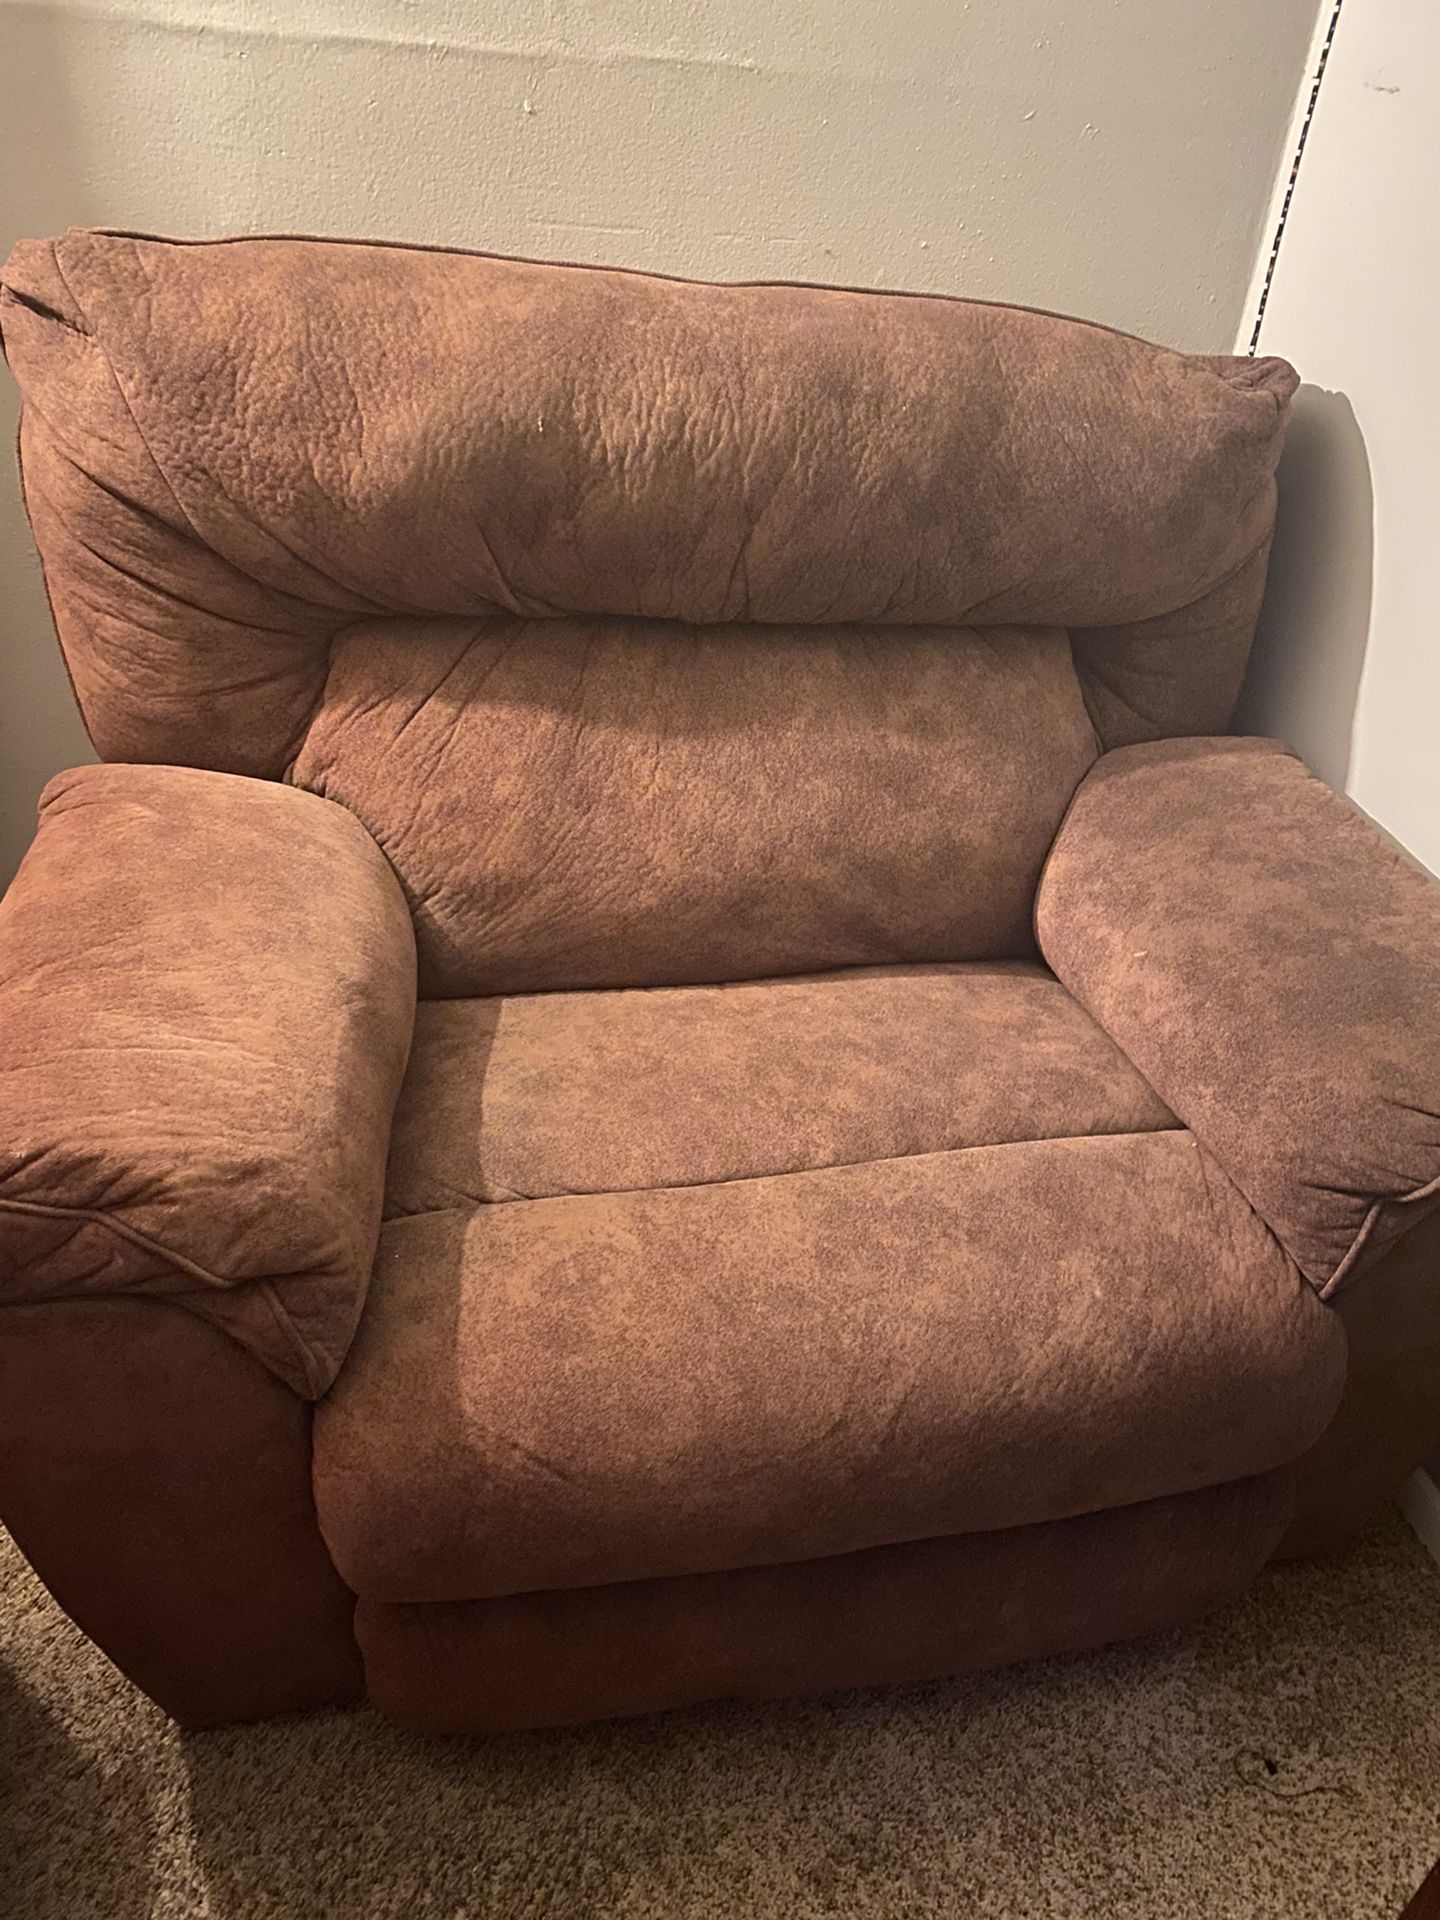 Good Condition Recliner